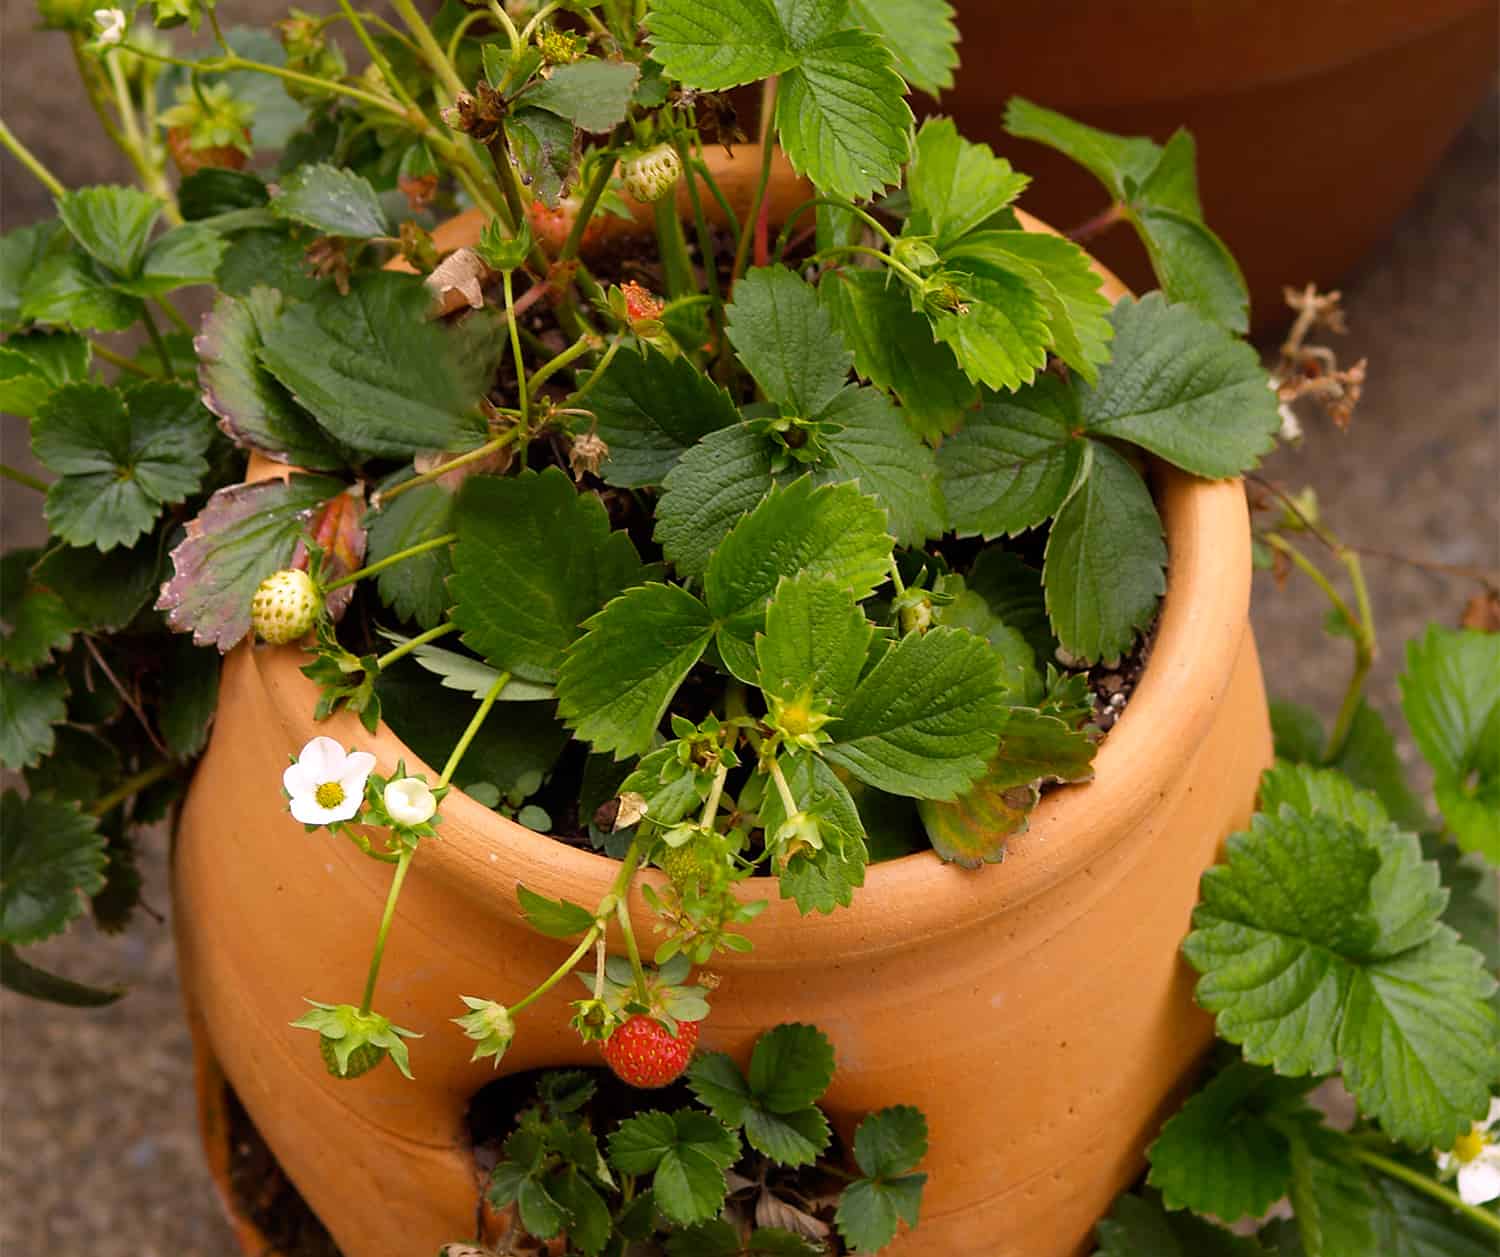 strawberries grown in containers